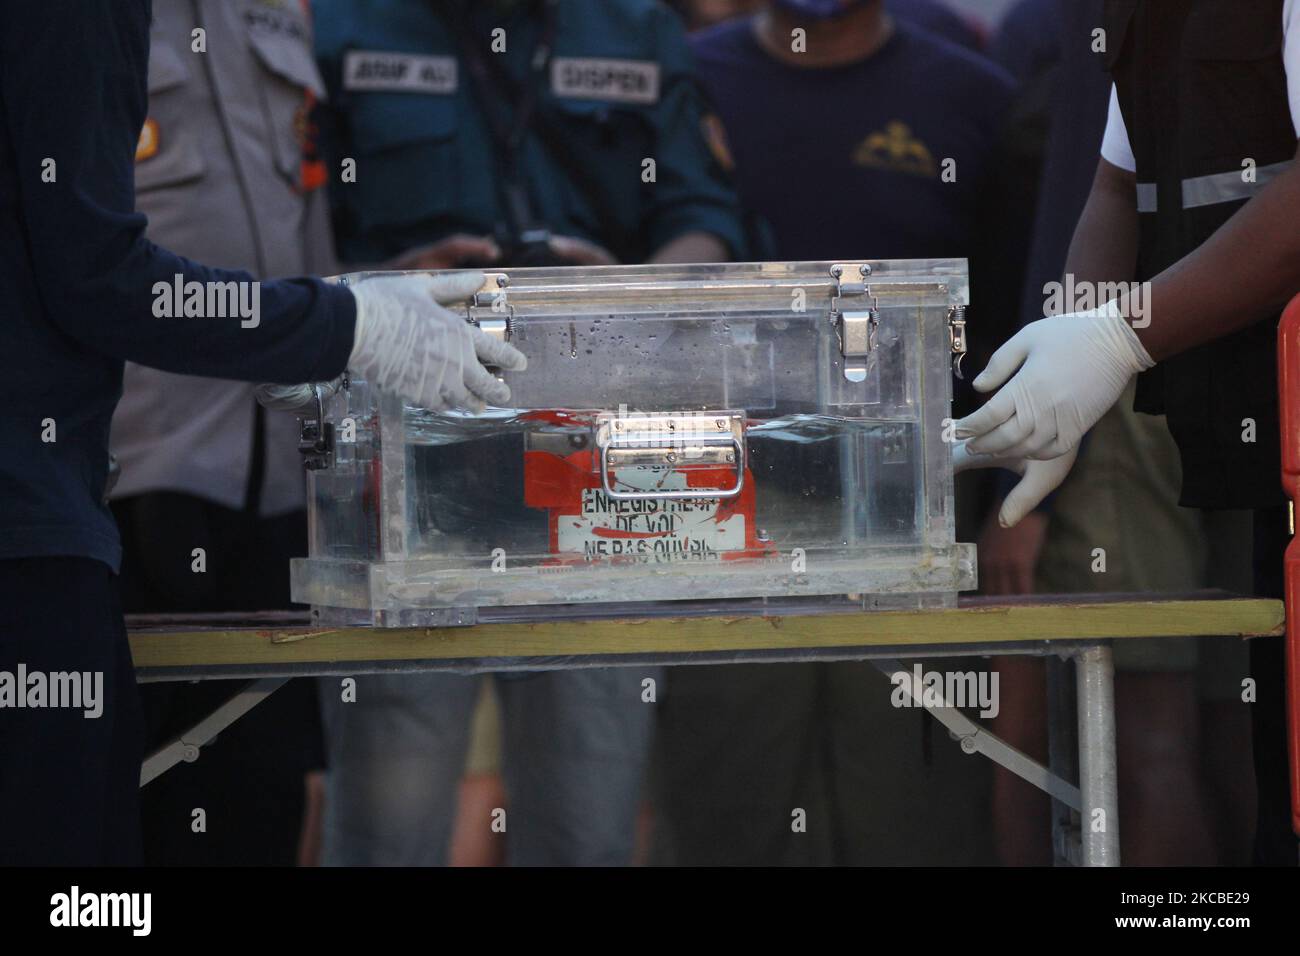 The Sriwijaya Air airline blackbox was found and entered into a special place to be taken for investigation at JICT pier, Tanjung Priok port, Jakarta on January 12, 2021. The search for the black box or black box of the Sriwijaya Air SJ182 aircraft that crashed in the waters around the island of Laki-Pulau Lancang, Jakarta after four days of searching. The blackbox was found by the Indonesian National Army (TNI) Navy. (Photo by Dasril Roszandi/NurPhoto) Stock Photo